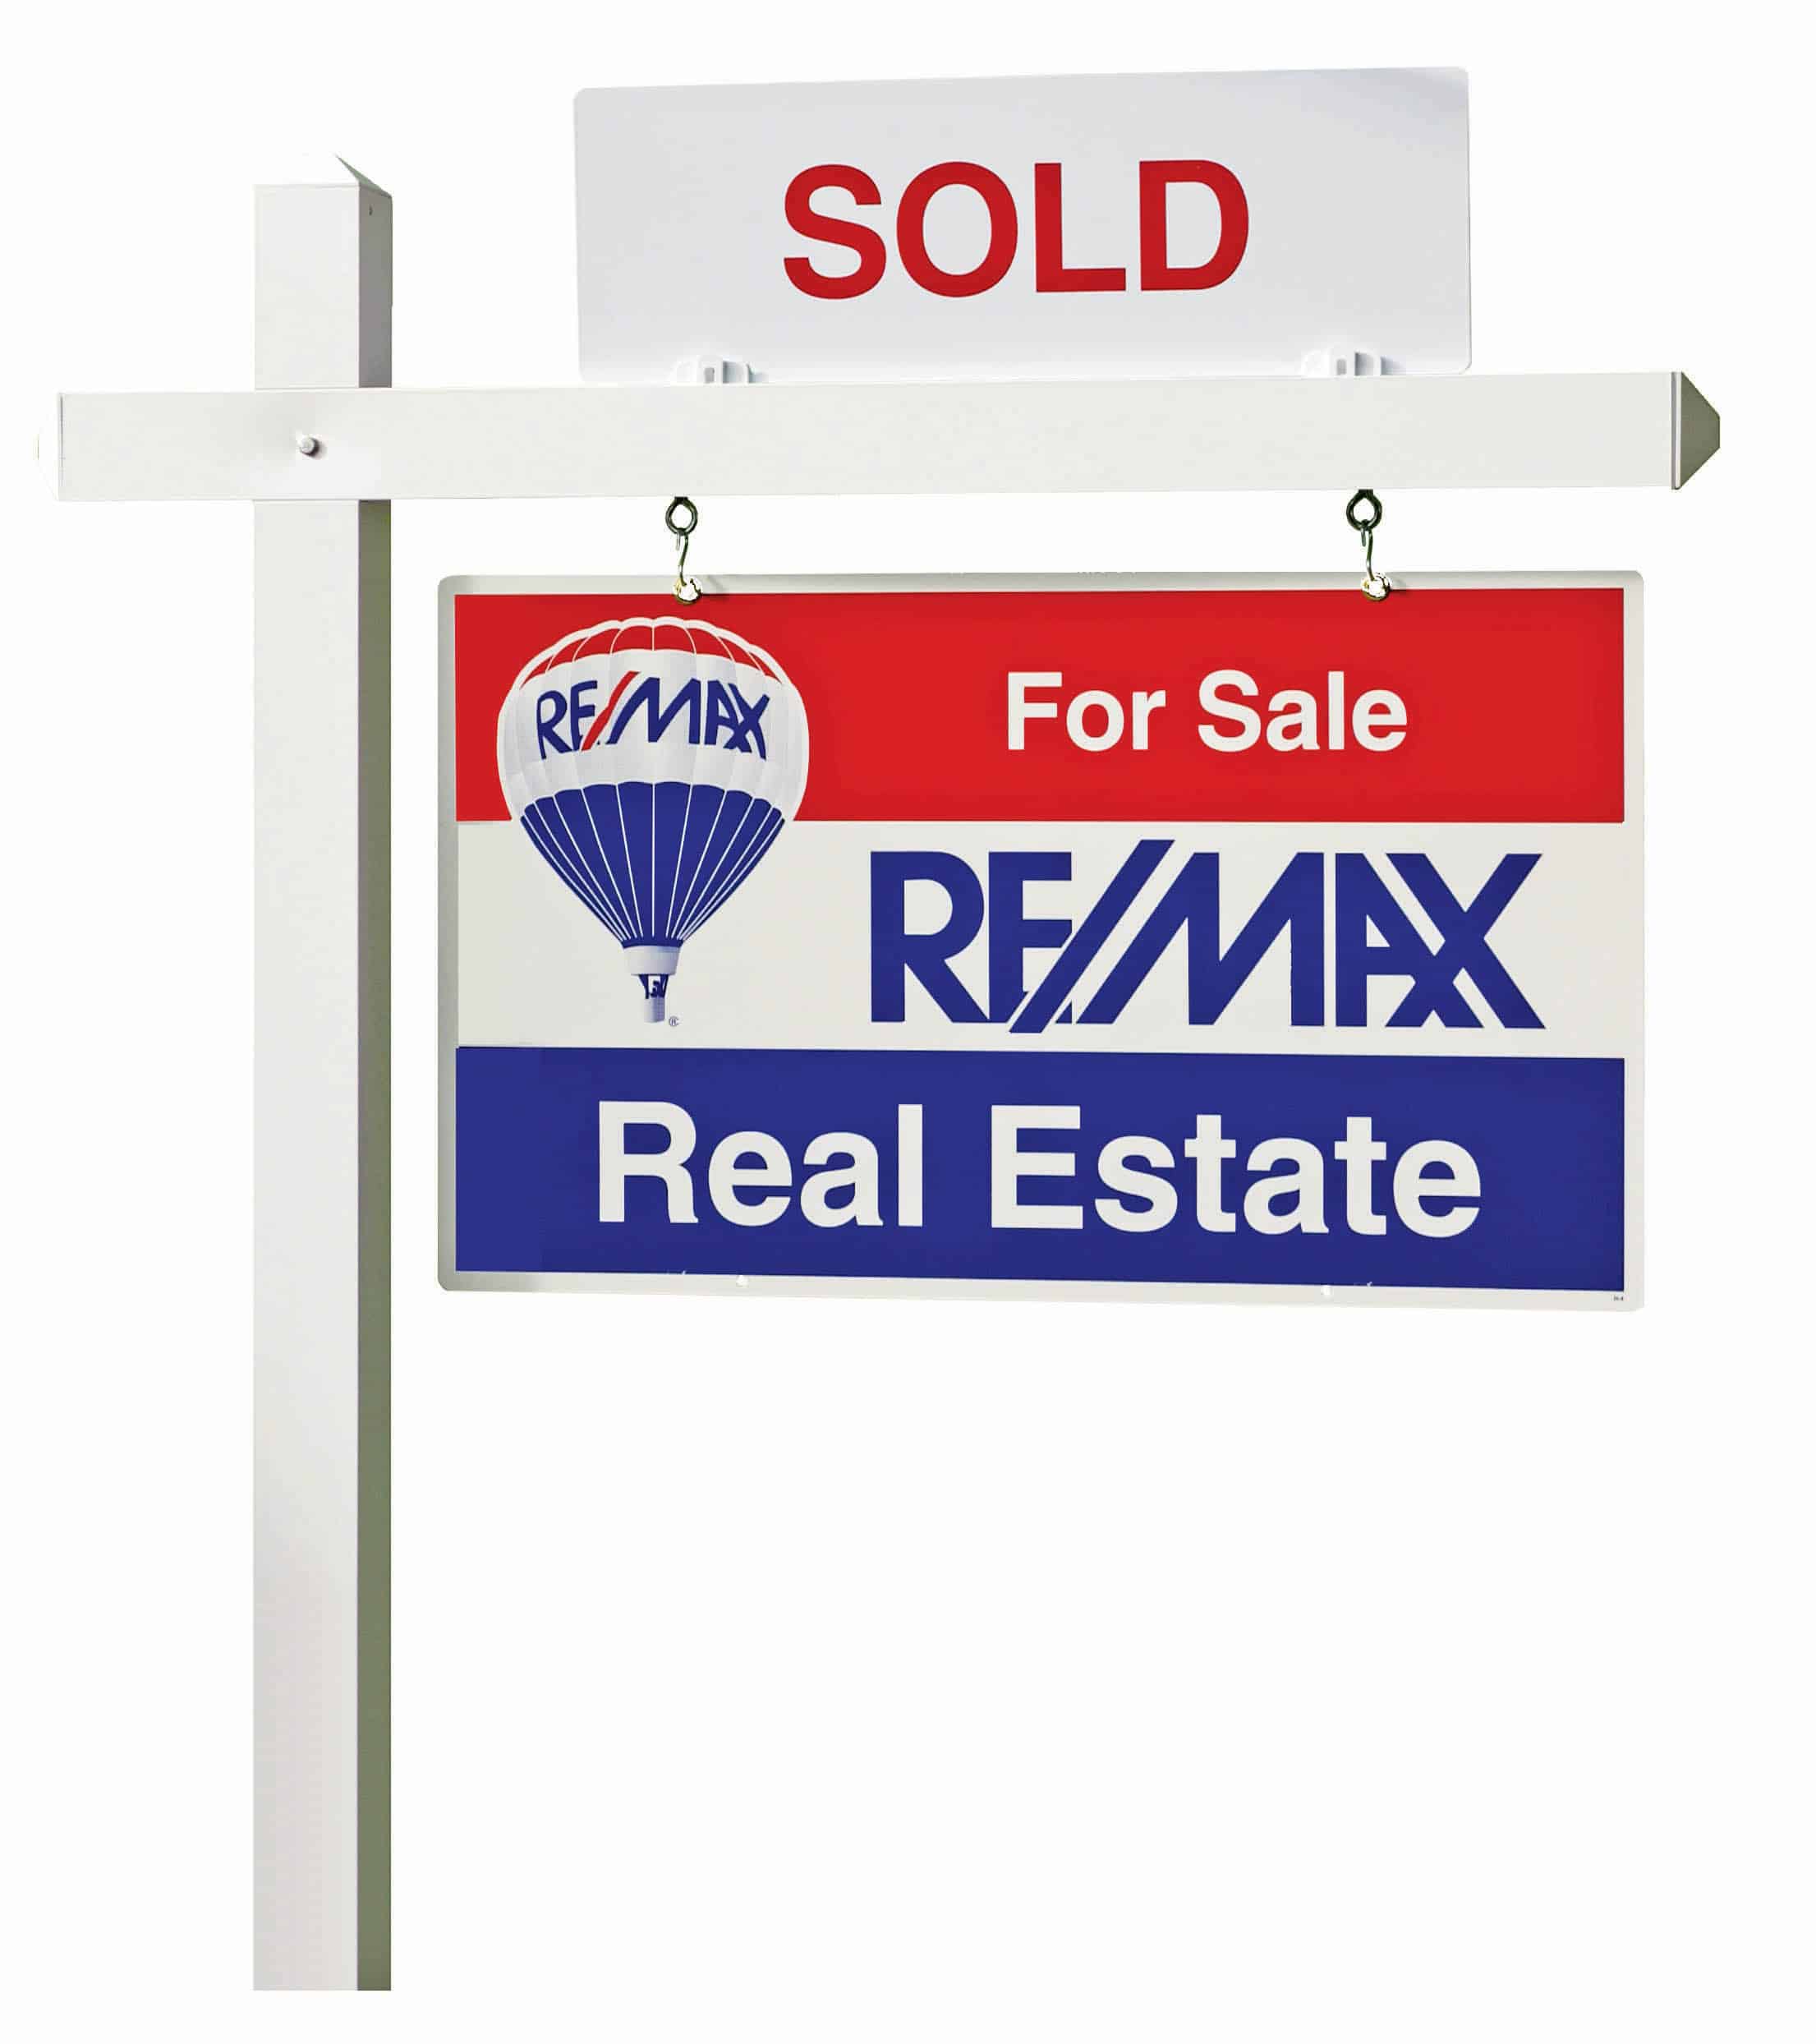 REMAX sold sign